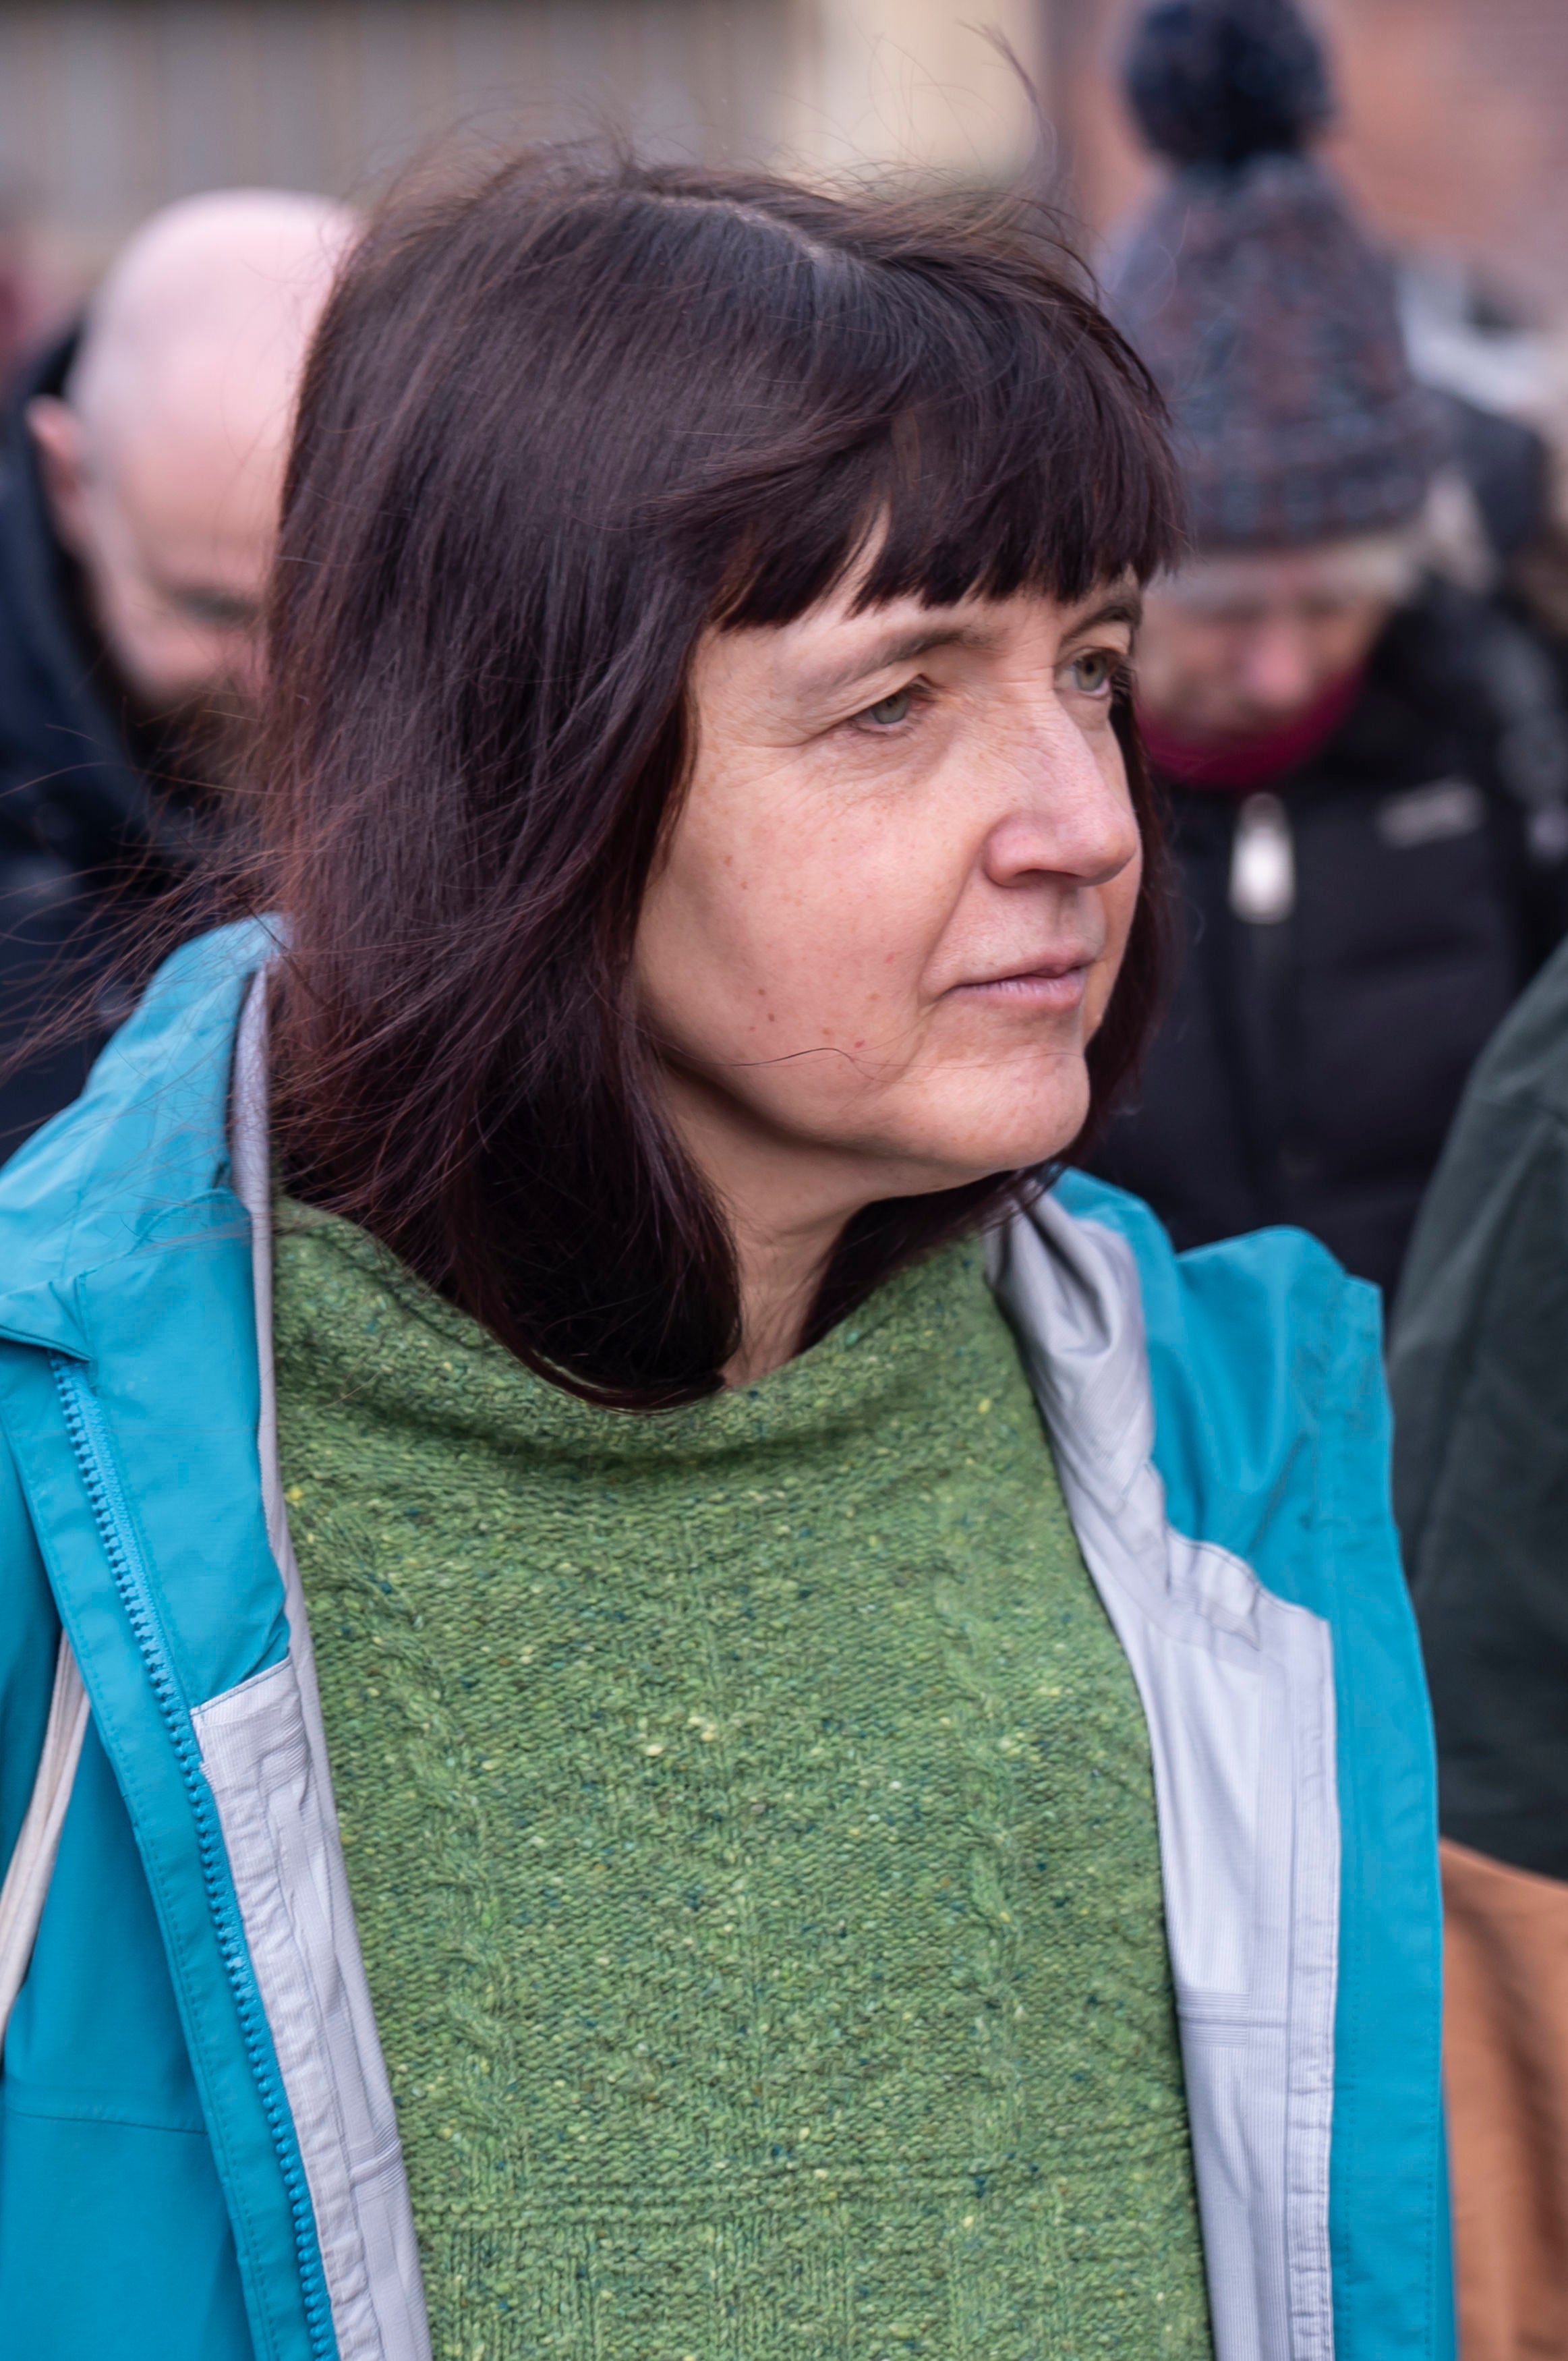 Just Stop Oil activist Margaret Reid outside Sheffield Magistrates' Court in January